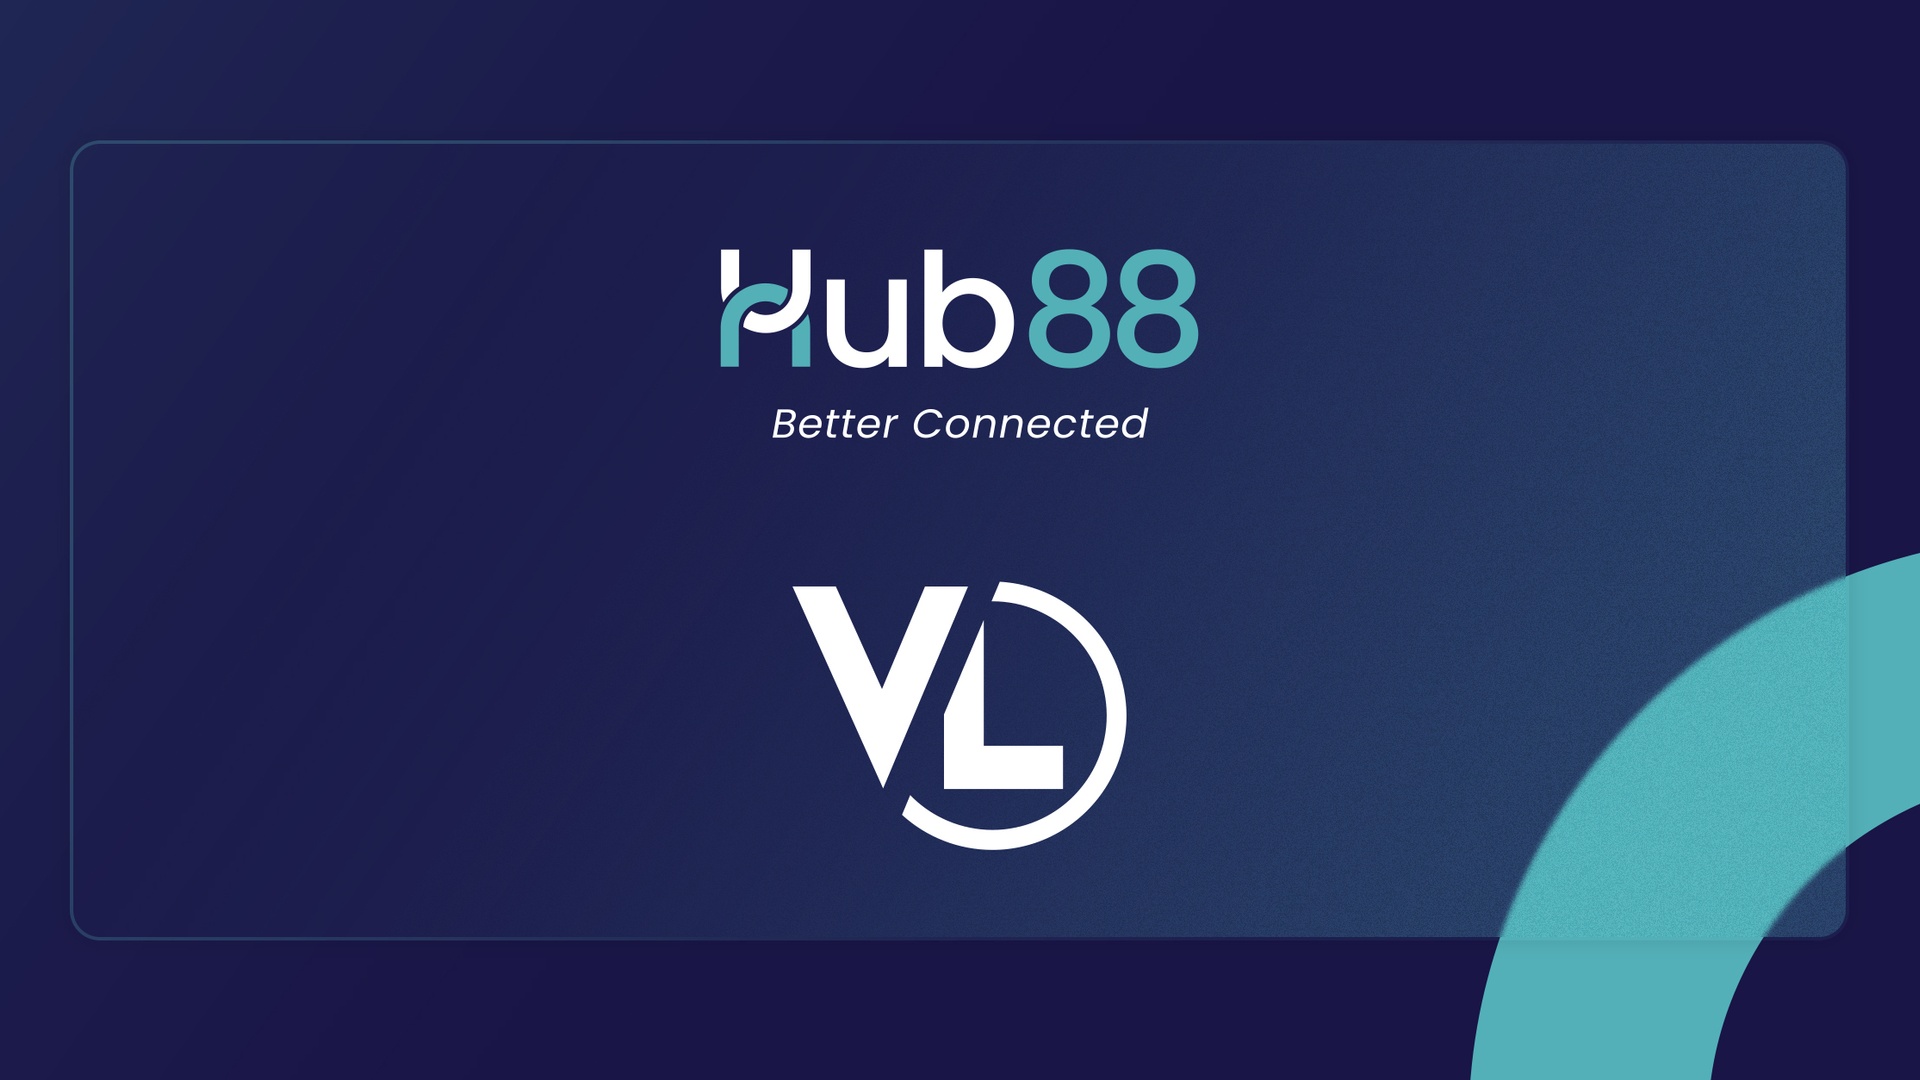 Cover Image for Hub88 strengthens platform offering with Playgon Games Inc live dealer content